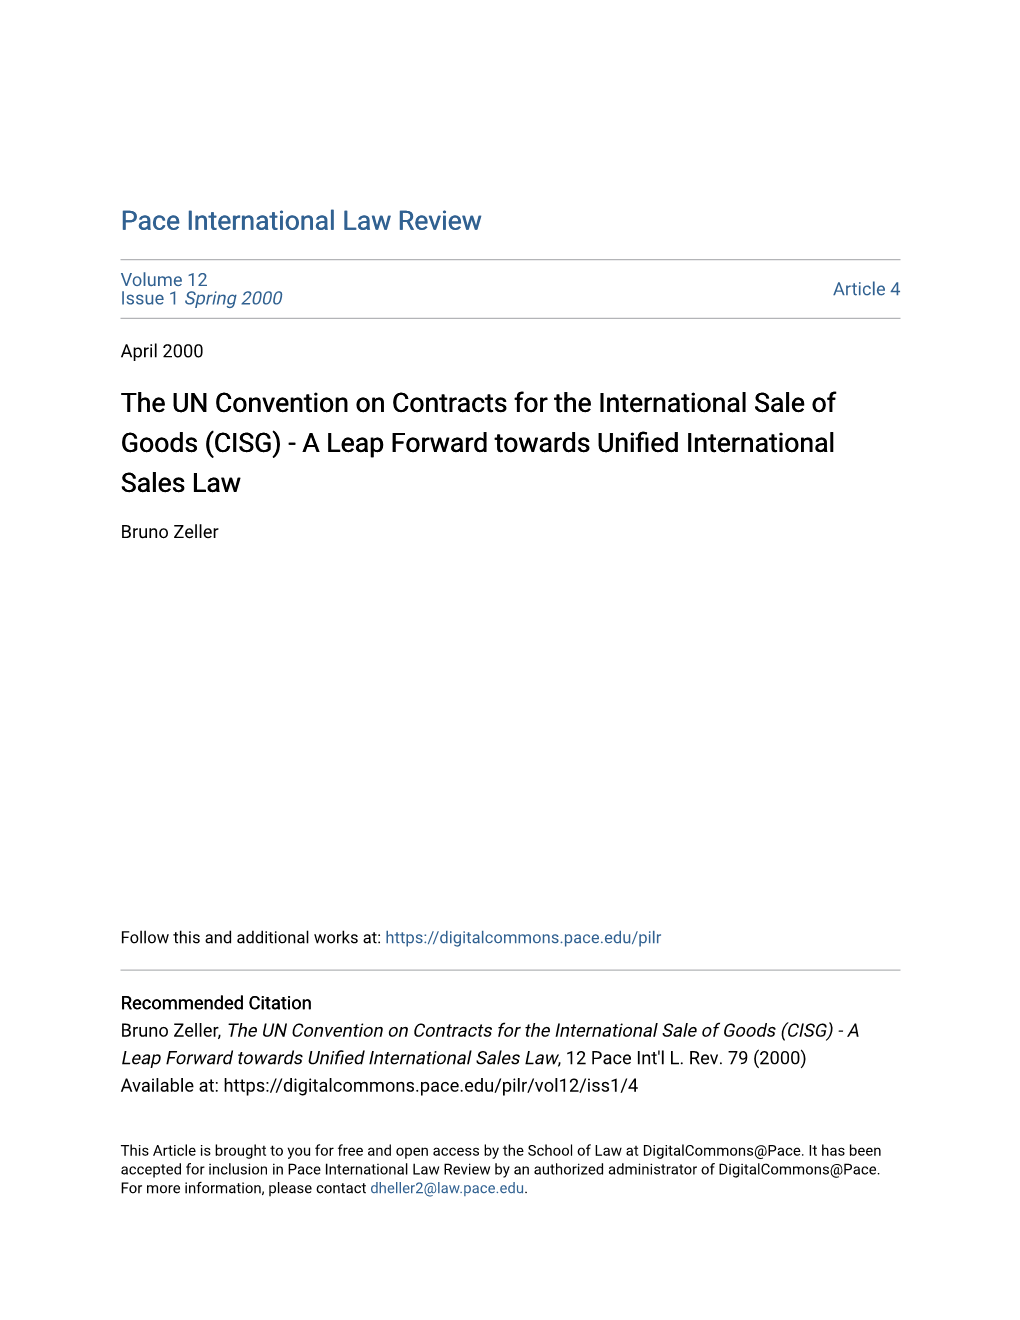 The UN Convention on Contracts for the International Sale of Goods (CISG) - a Leap Forward Towards Unified International Sales Law